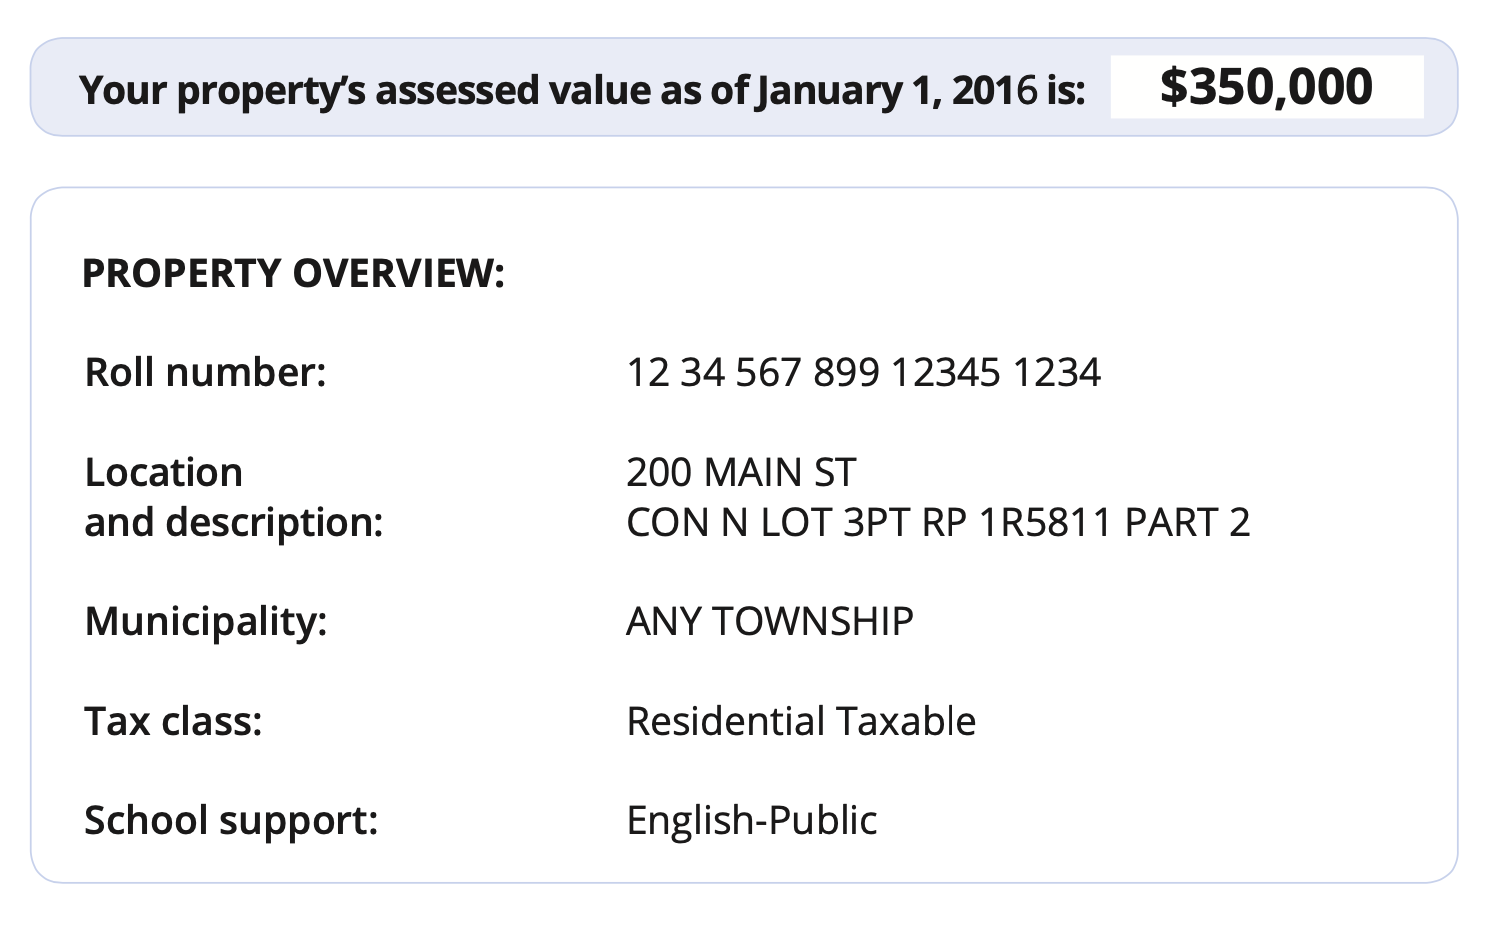 See your property's assessed value as of Jan 1, 2016, with your roll number, lot location, municipality and tax class.